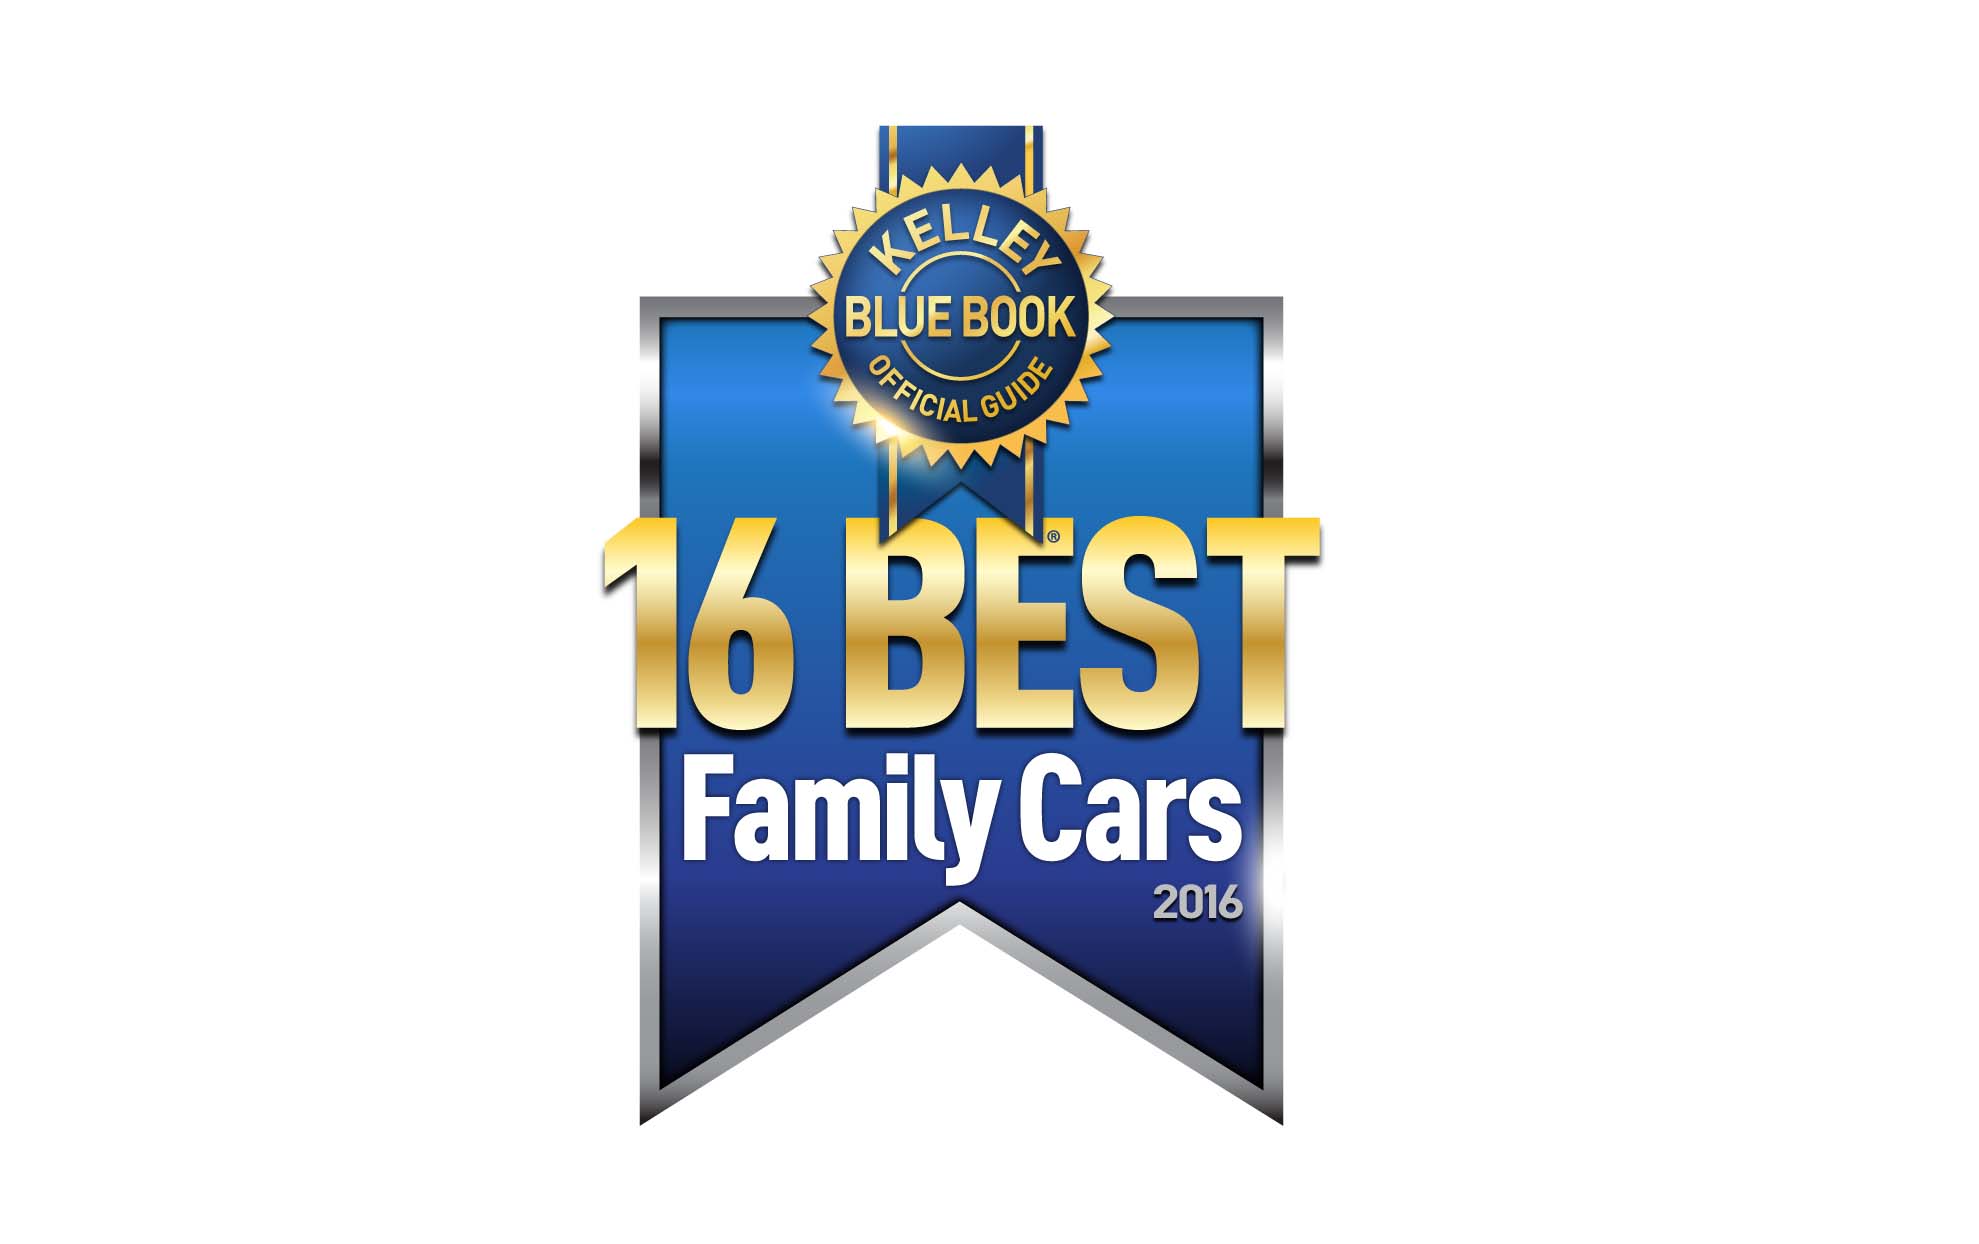 After extensively testing two dozen Best Family Cars finalists, the KBB.com editors decided upon a list of 16 vehicles that they feel best fit the title of Kelley Blue Book Best Family Cars of 2016.